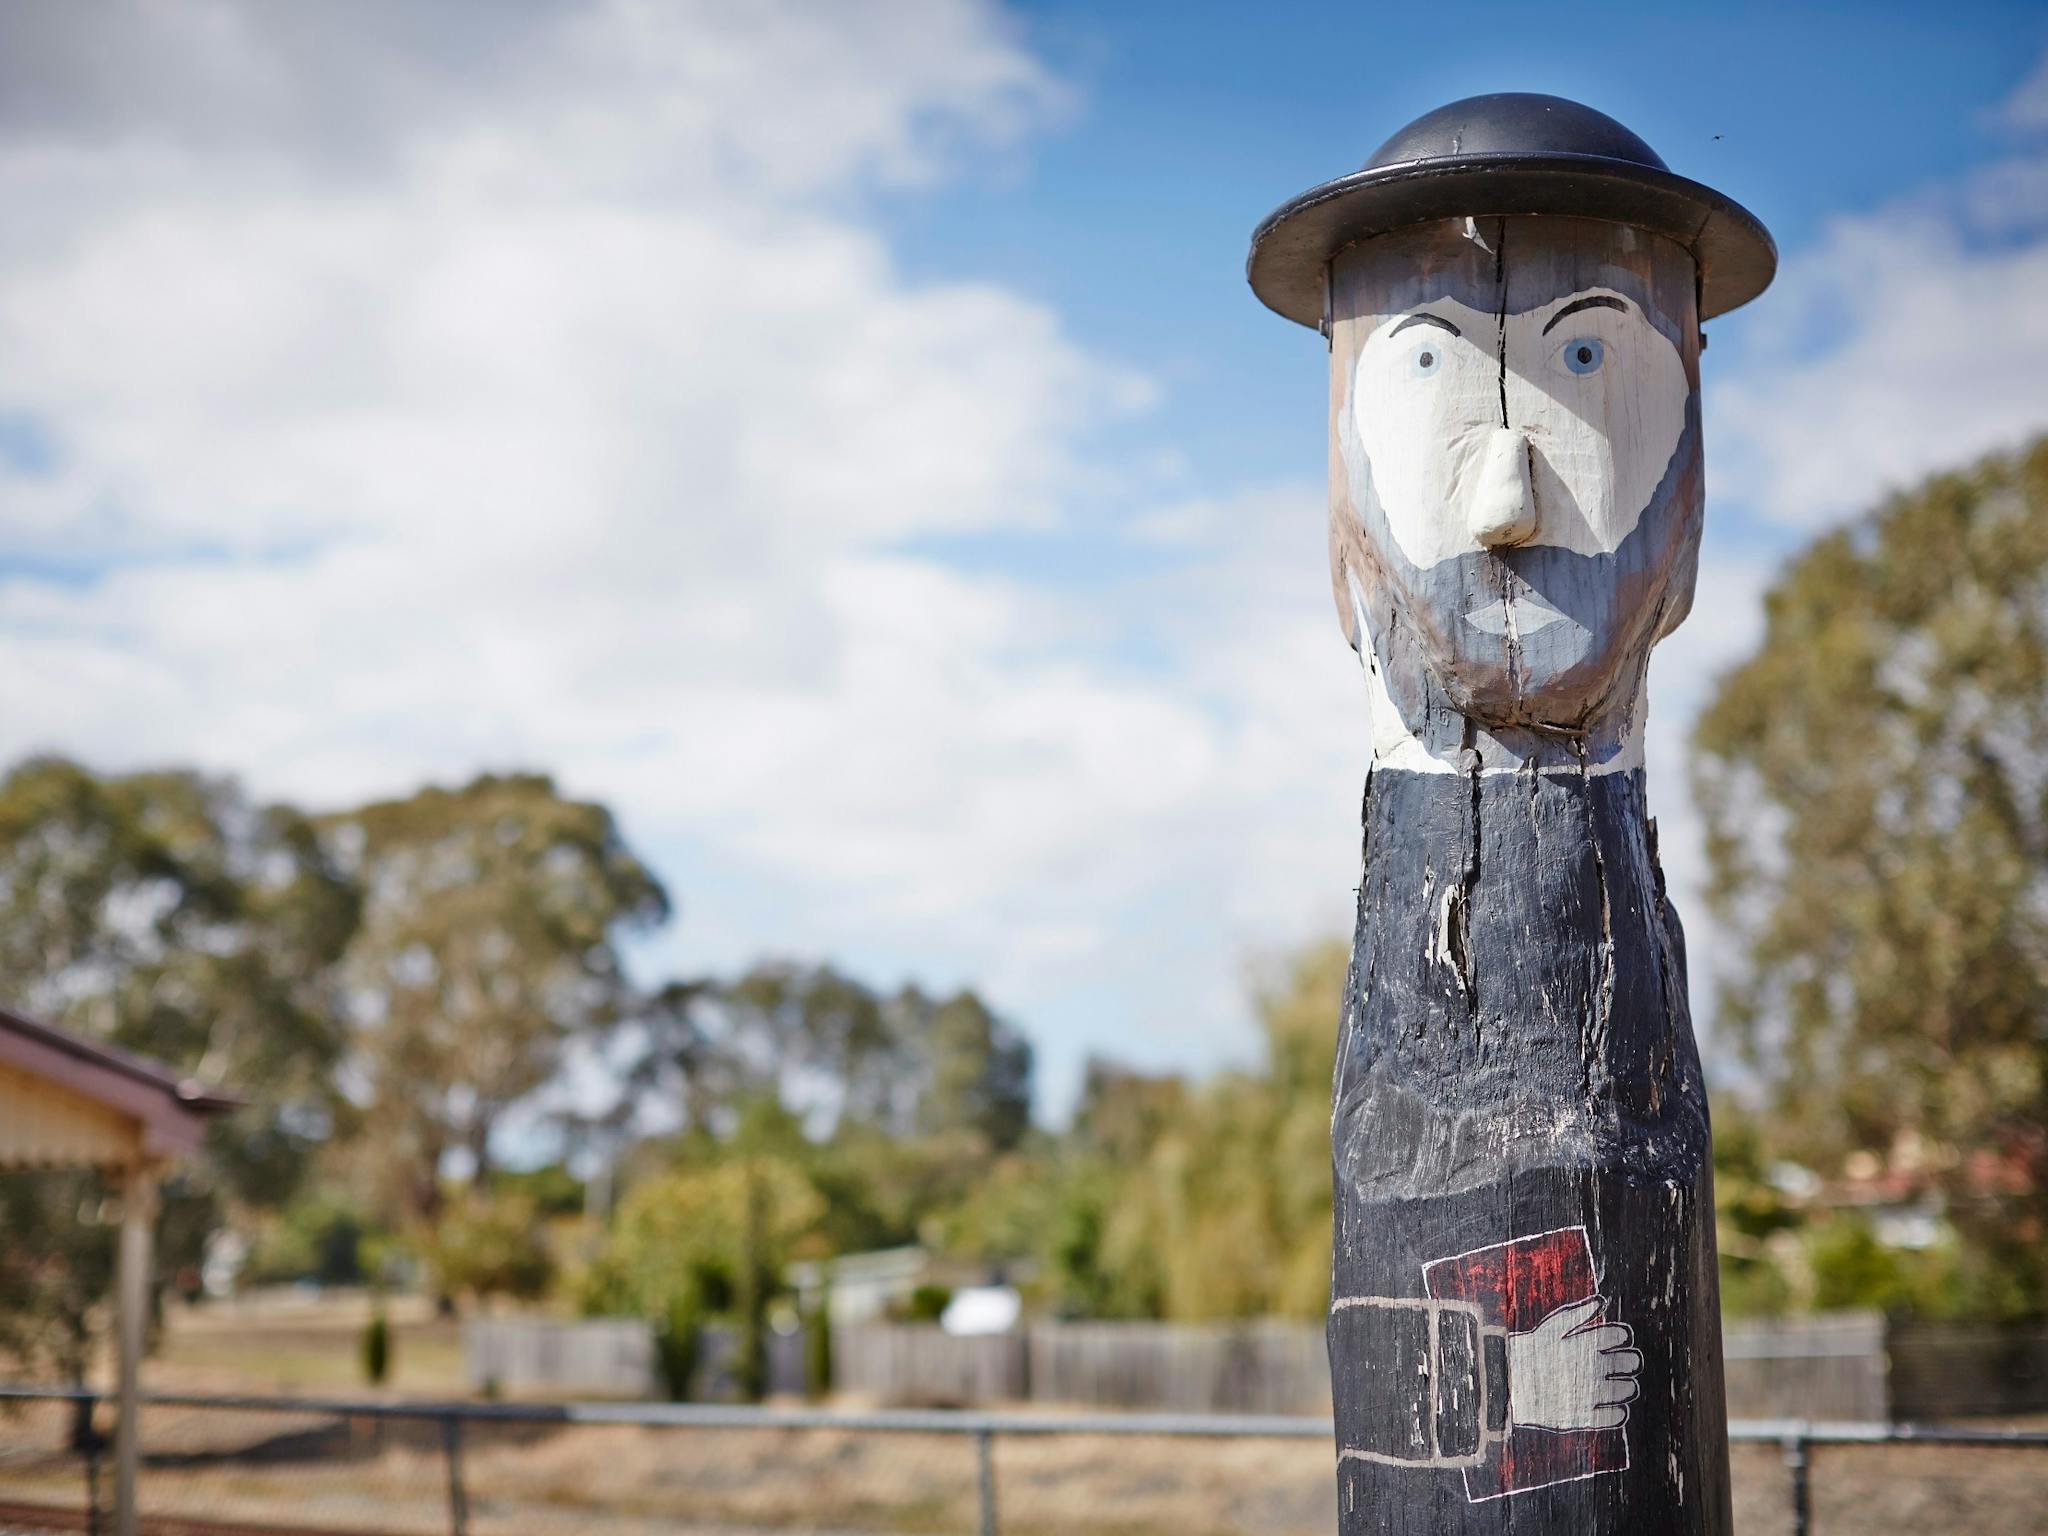 Bollard that looks like a bearded man, wearing a hat, and holding a book, trees, clouds, sunny day.